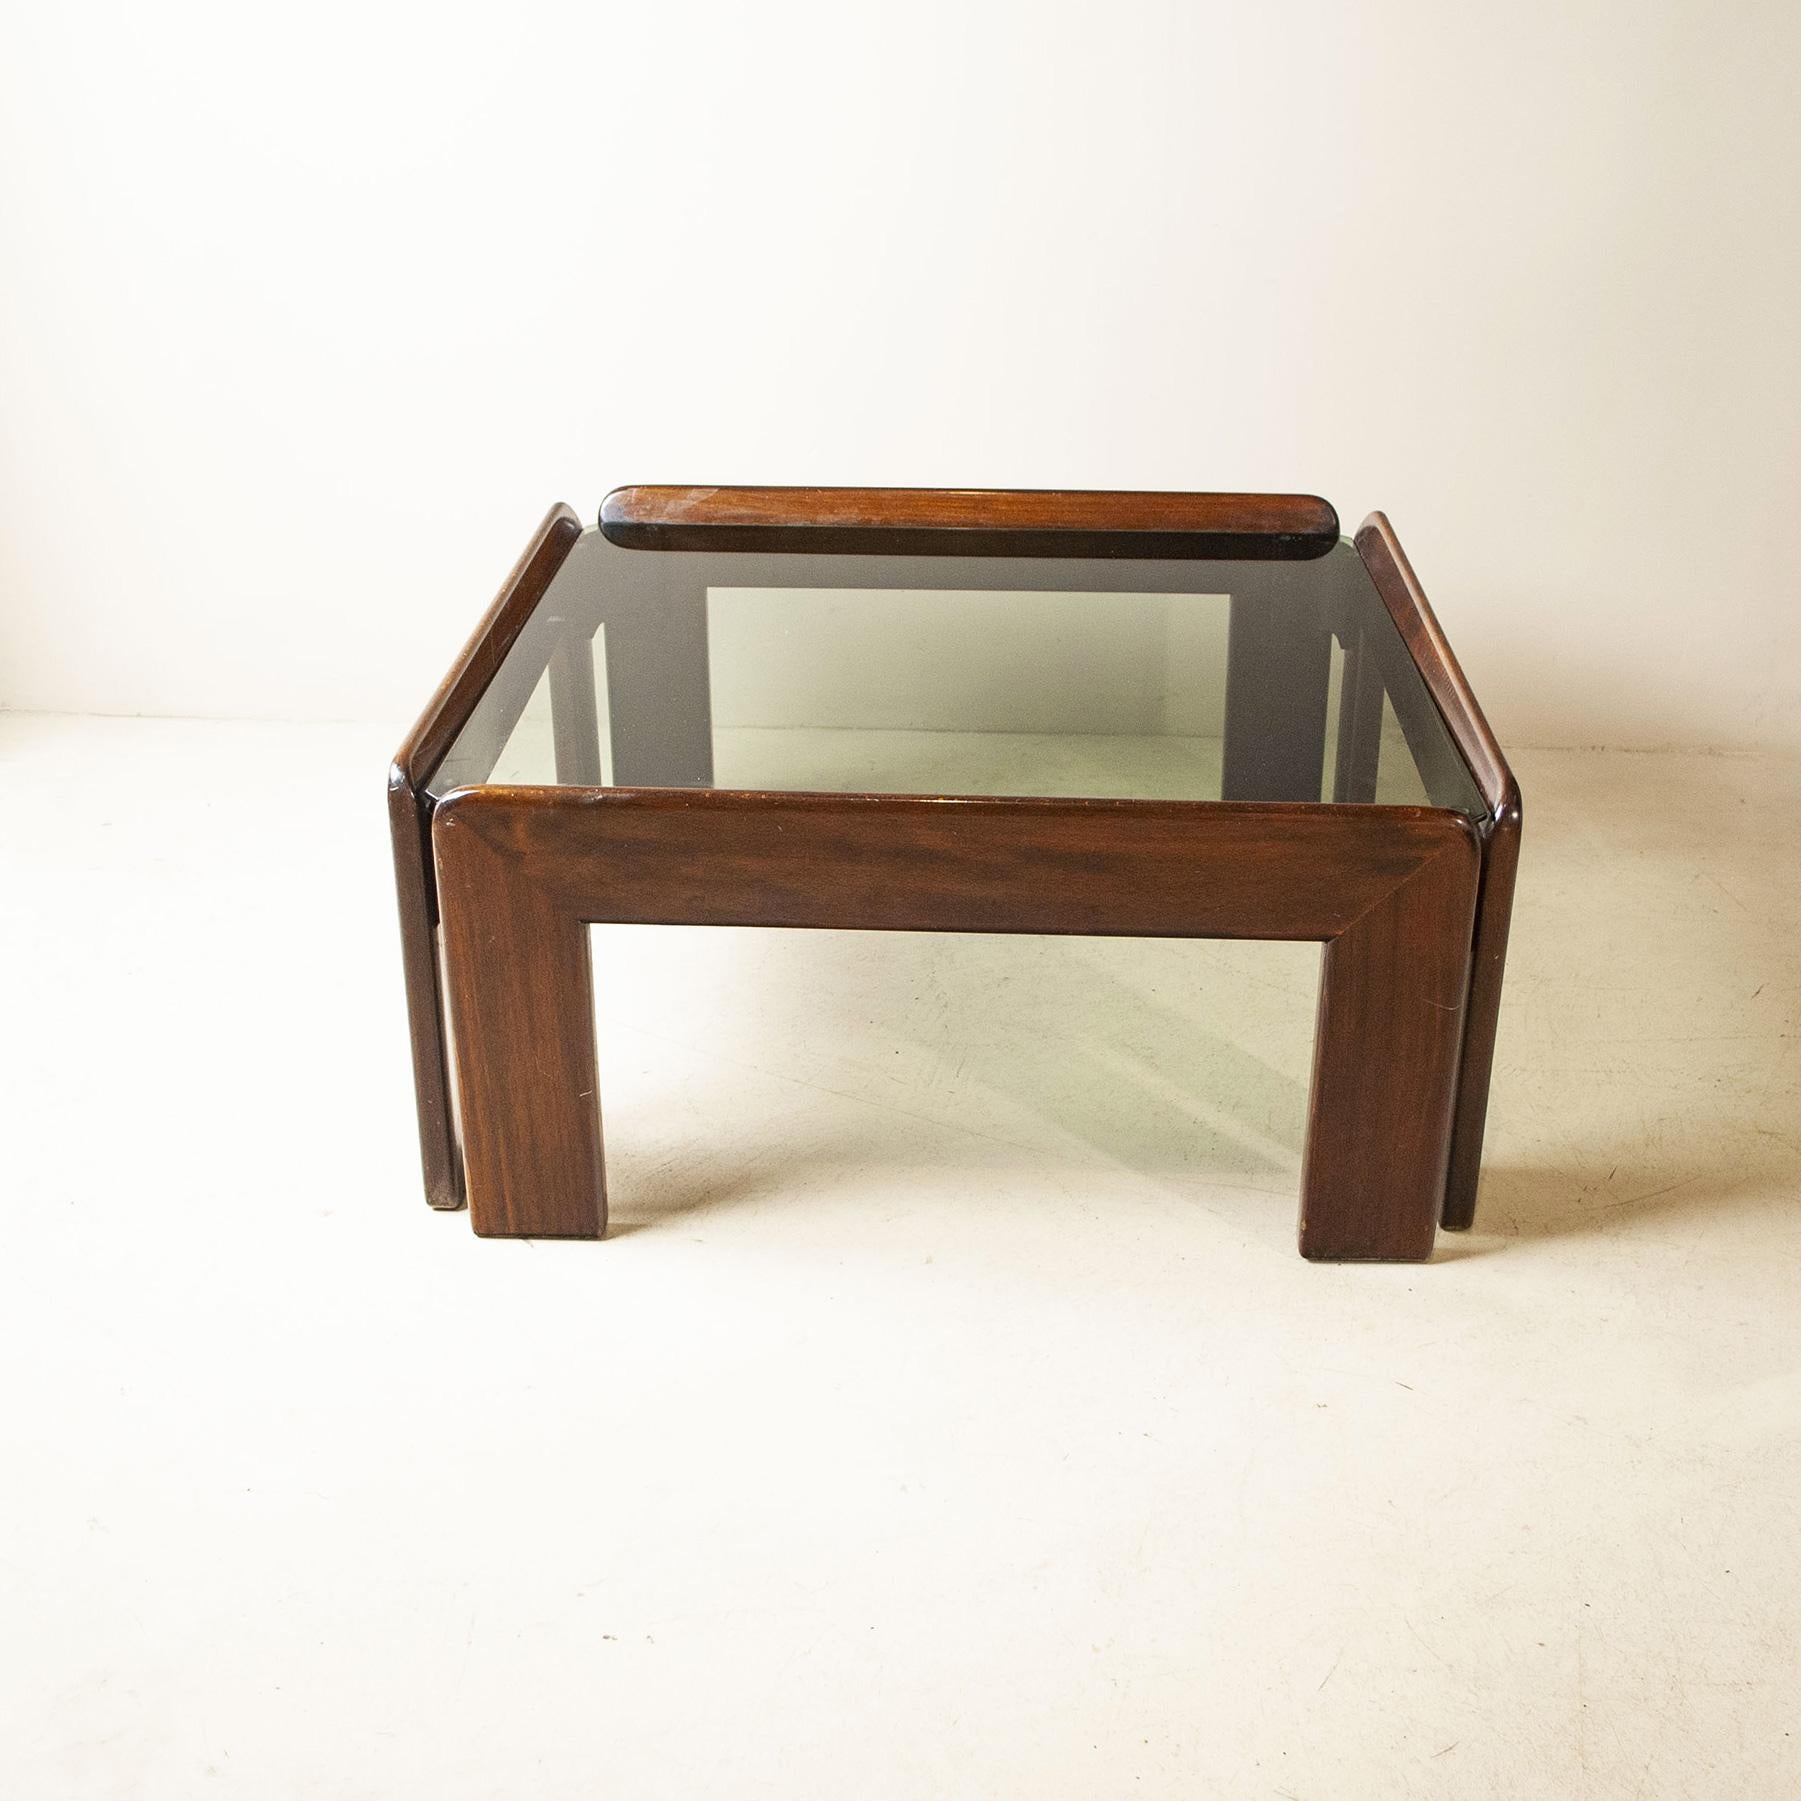 Mid-Century Modern Afra & Tobia Scarpa coffee table from the 70's.